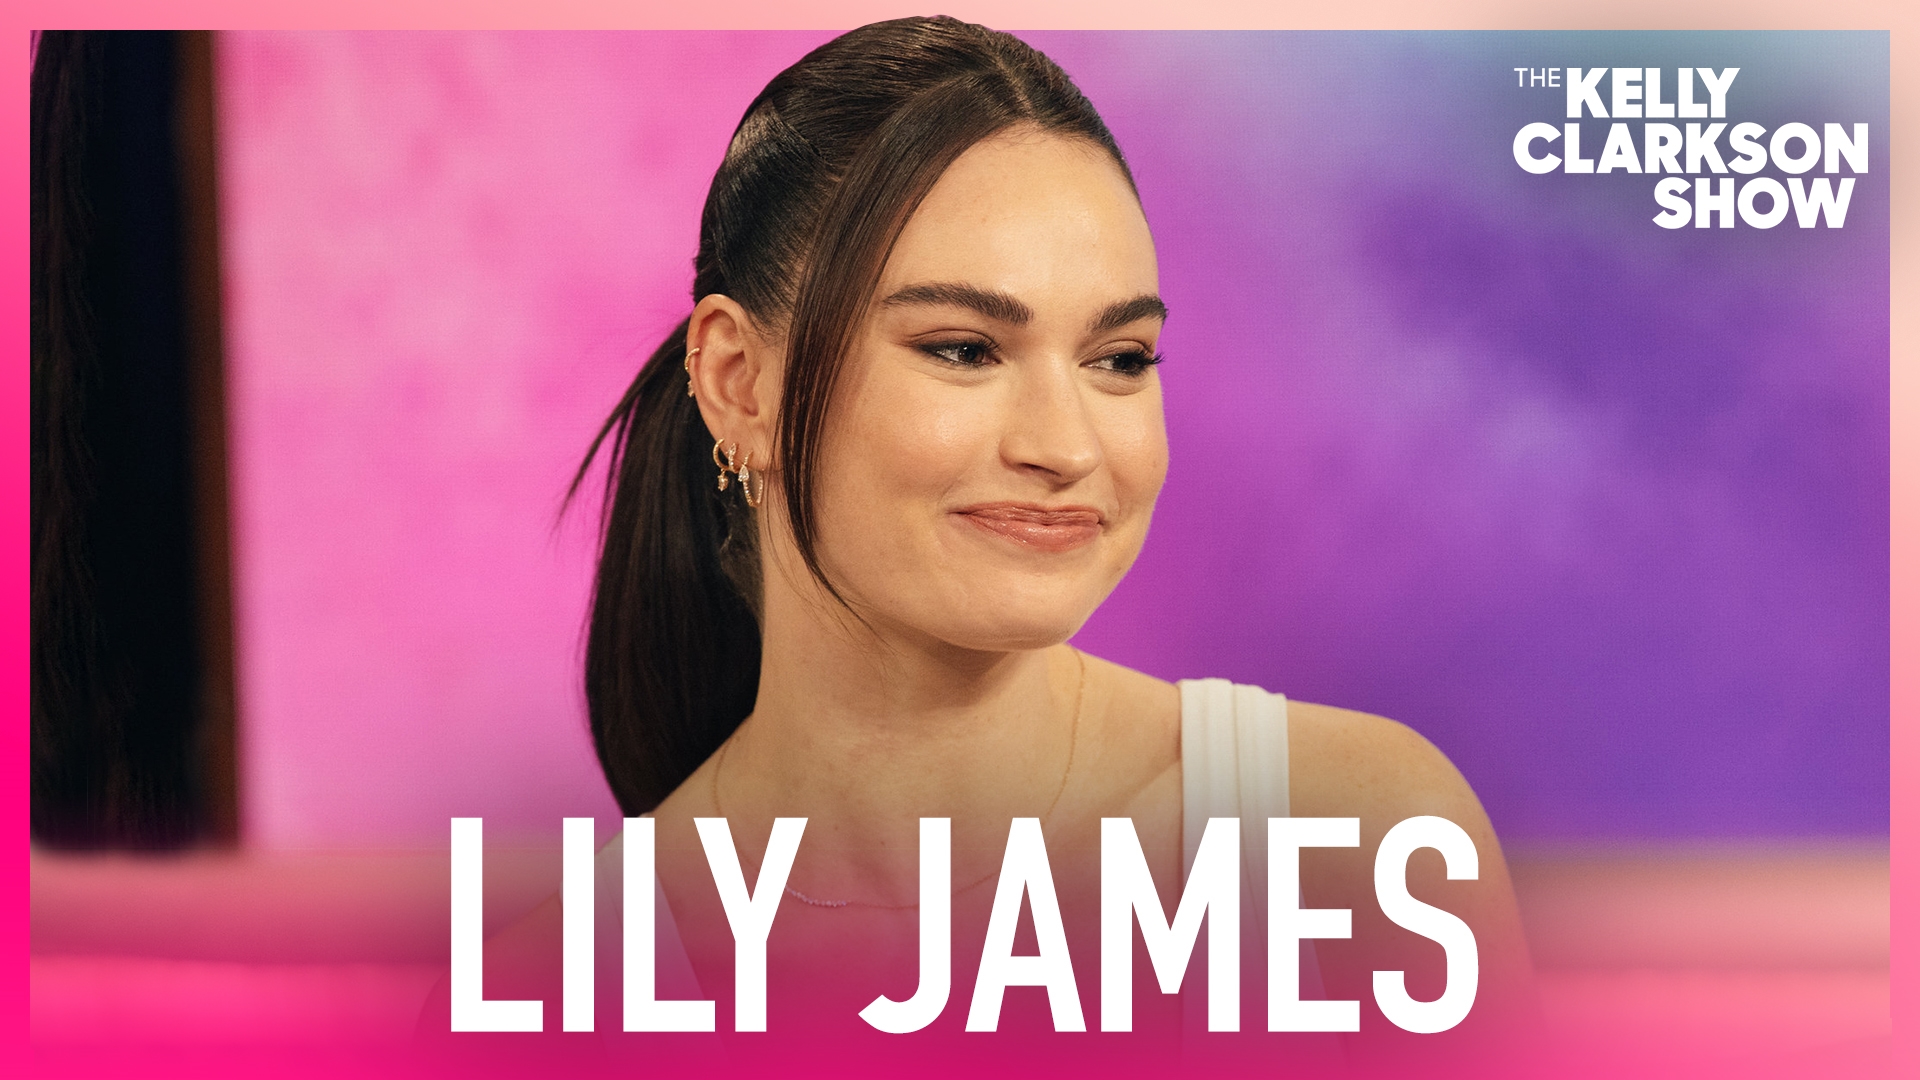 Mamma Mia 3 possibility addressed by Lily James